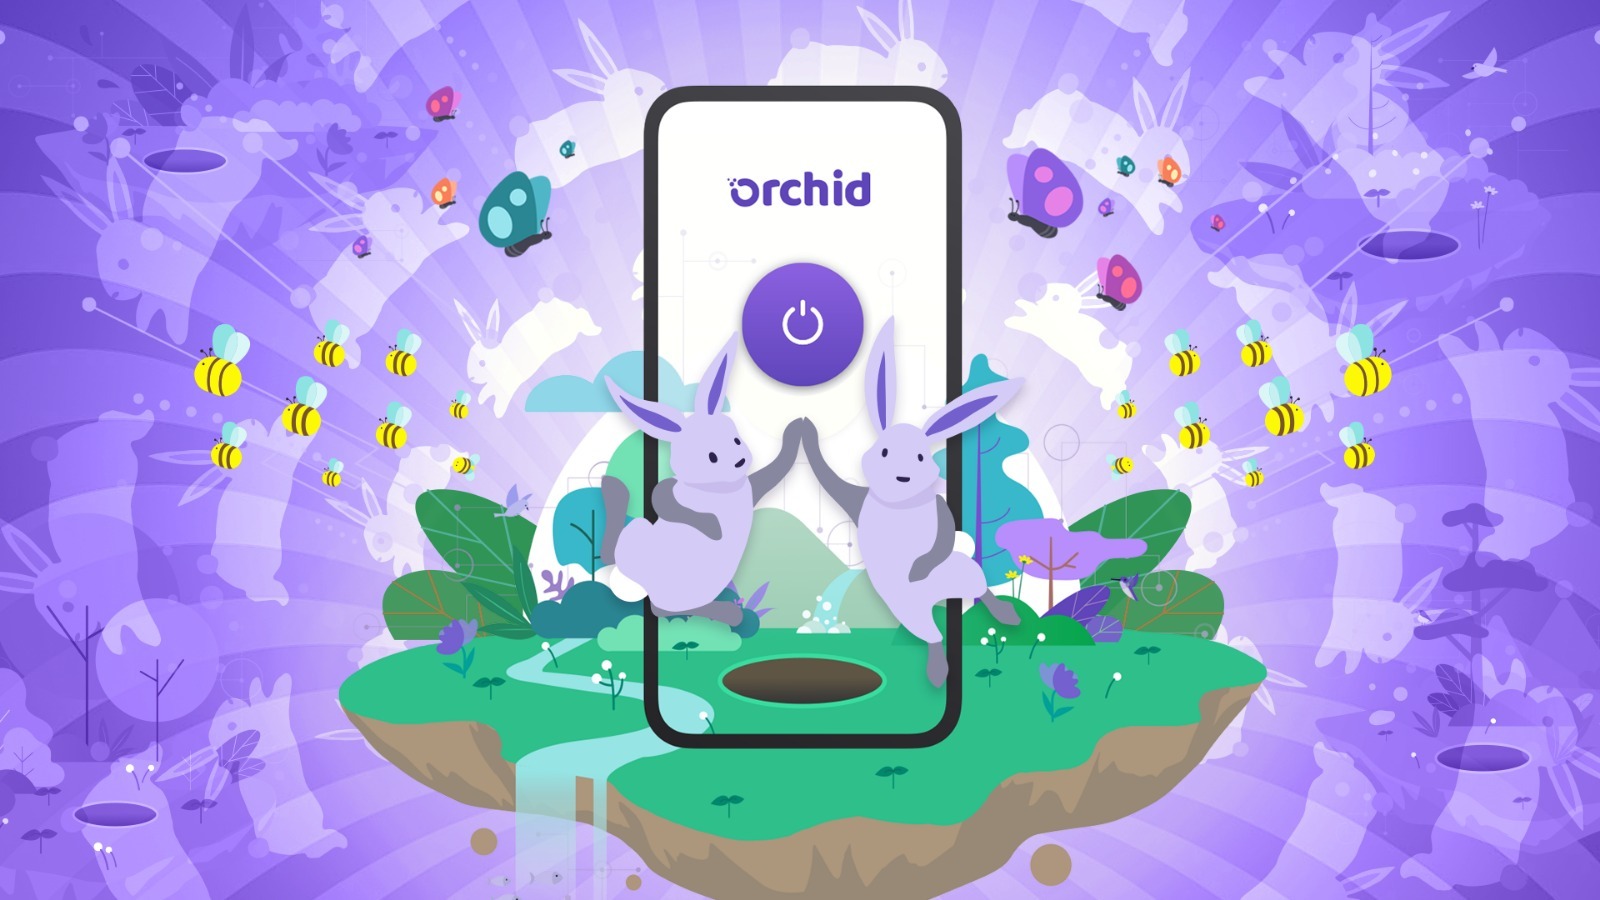 Orchid cryptocurrency OXT